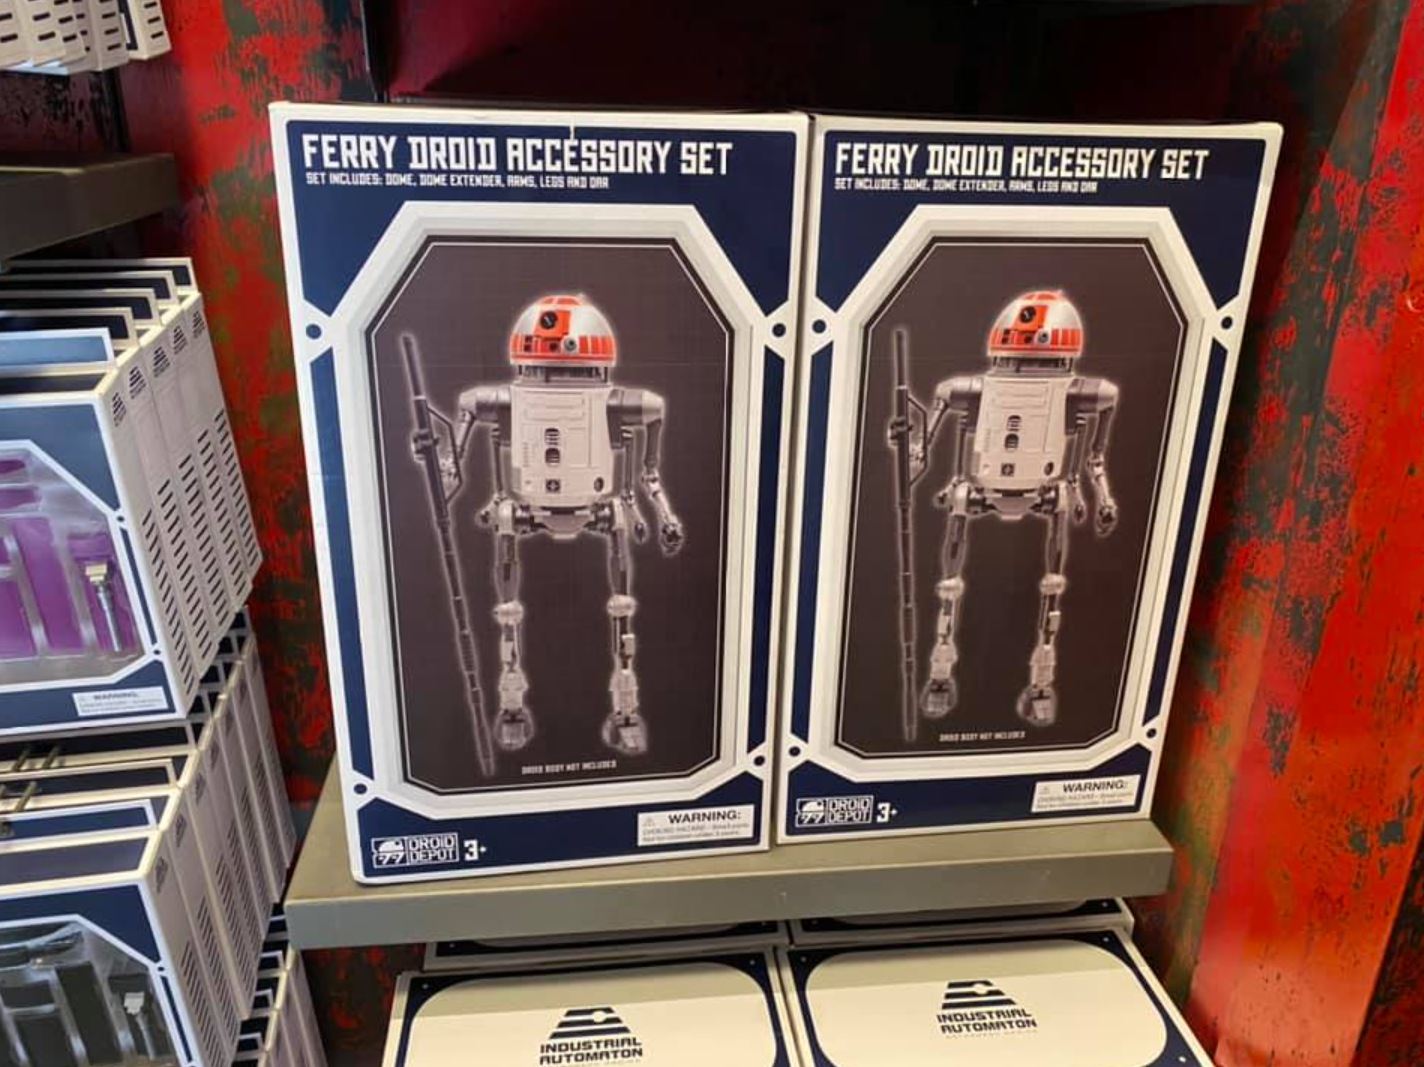 Star Wars: Galaxy's Edge Update - New Chopper Droid, Apparel, and TONS More! | Anakin and His Angel